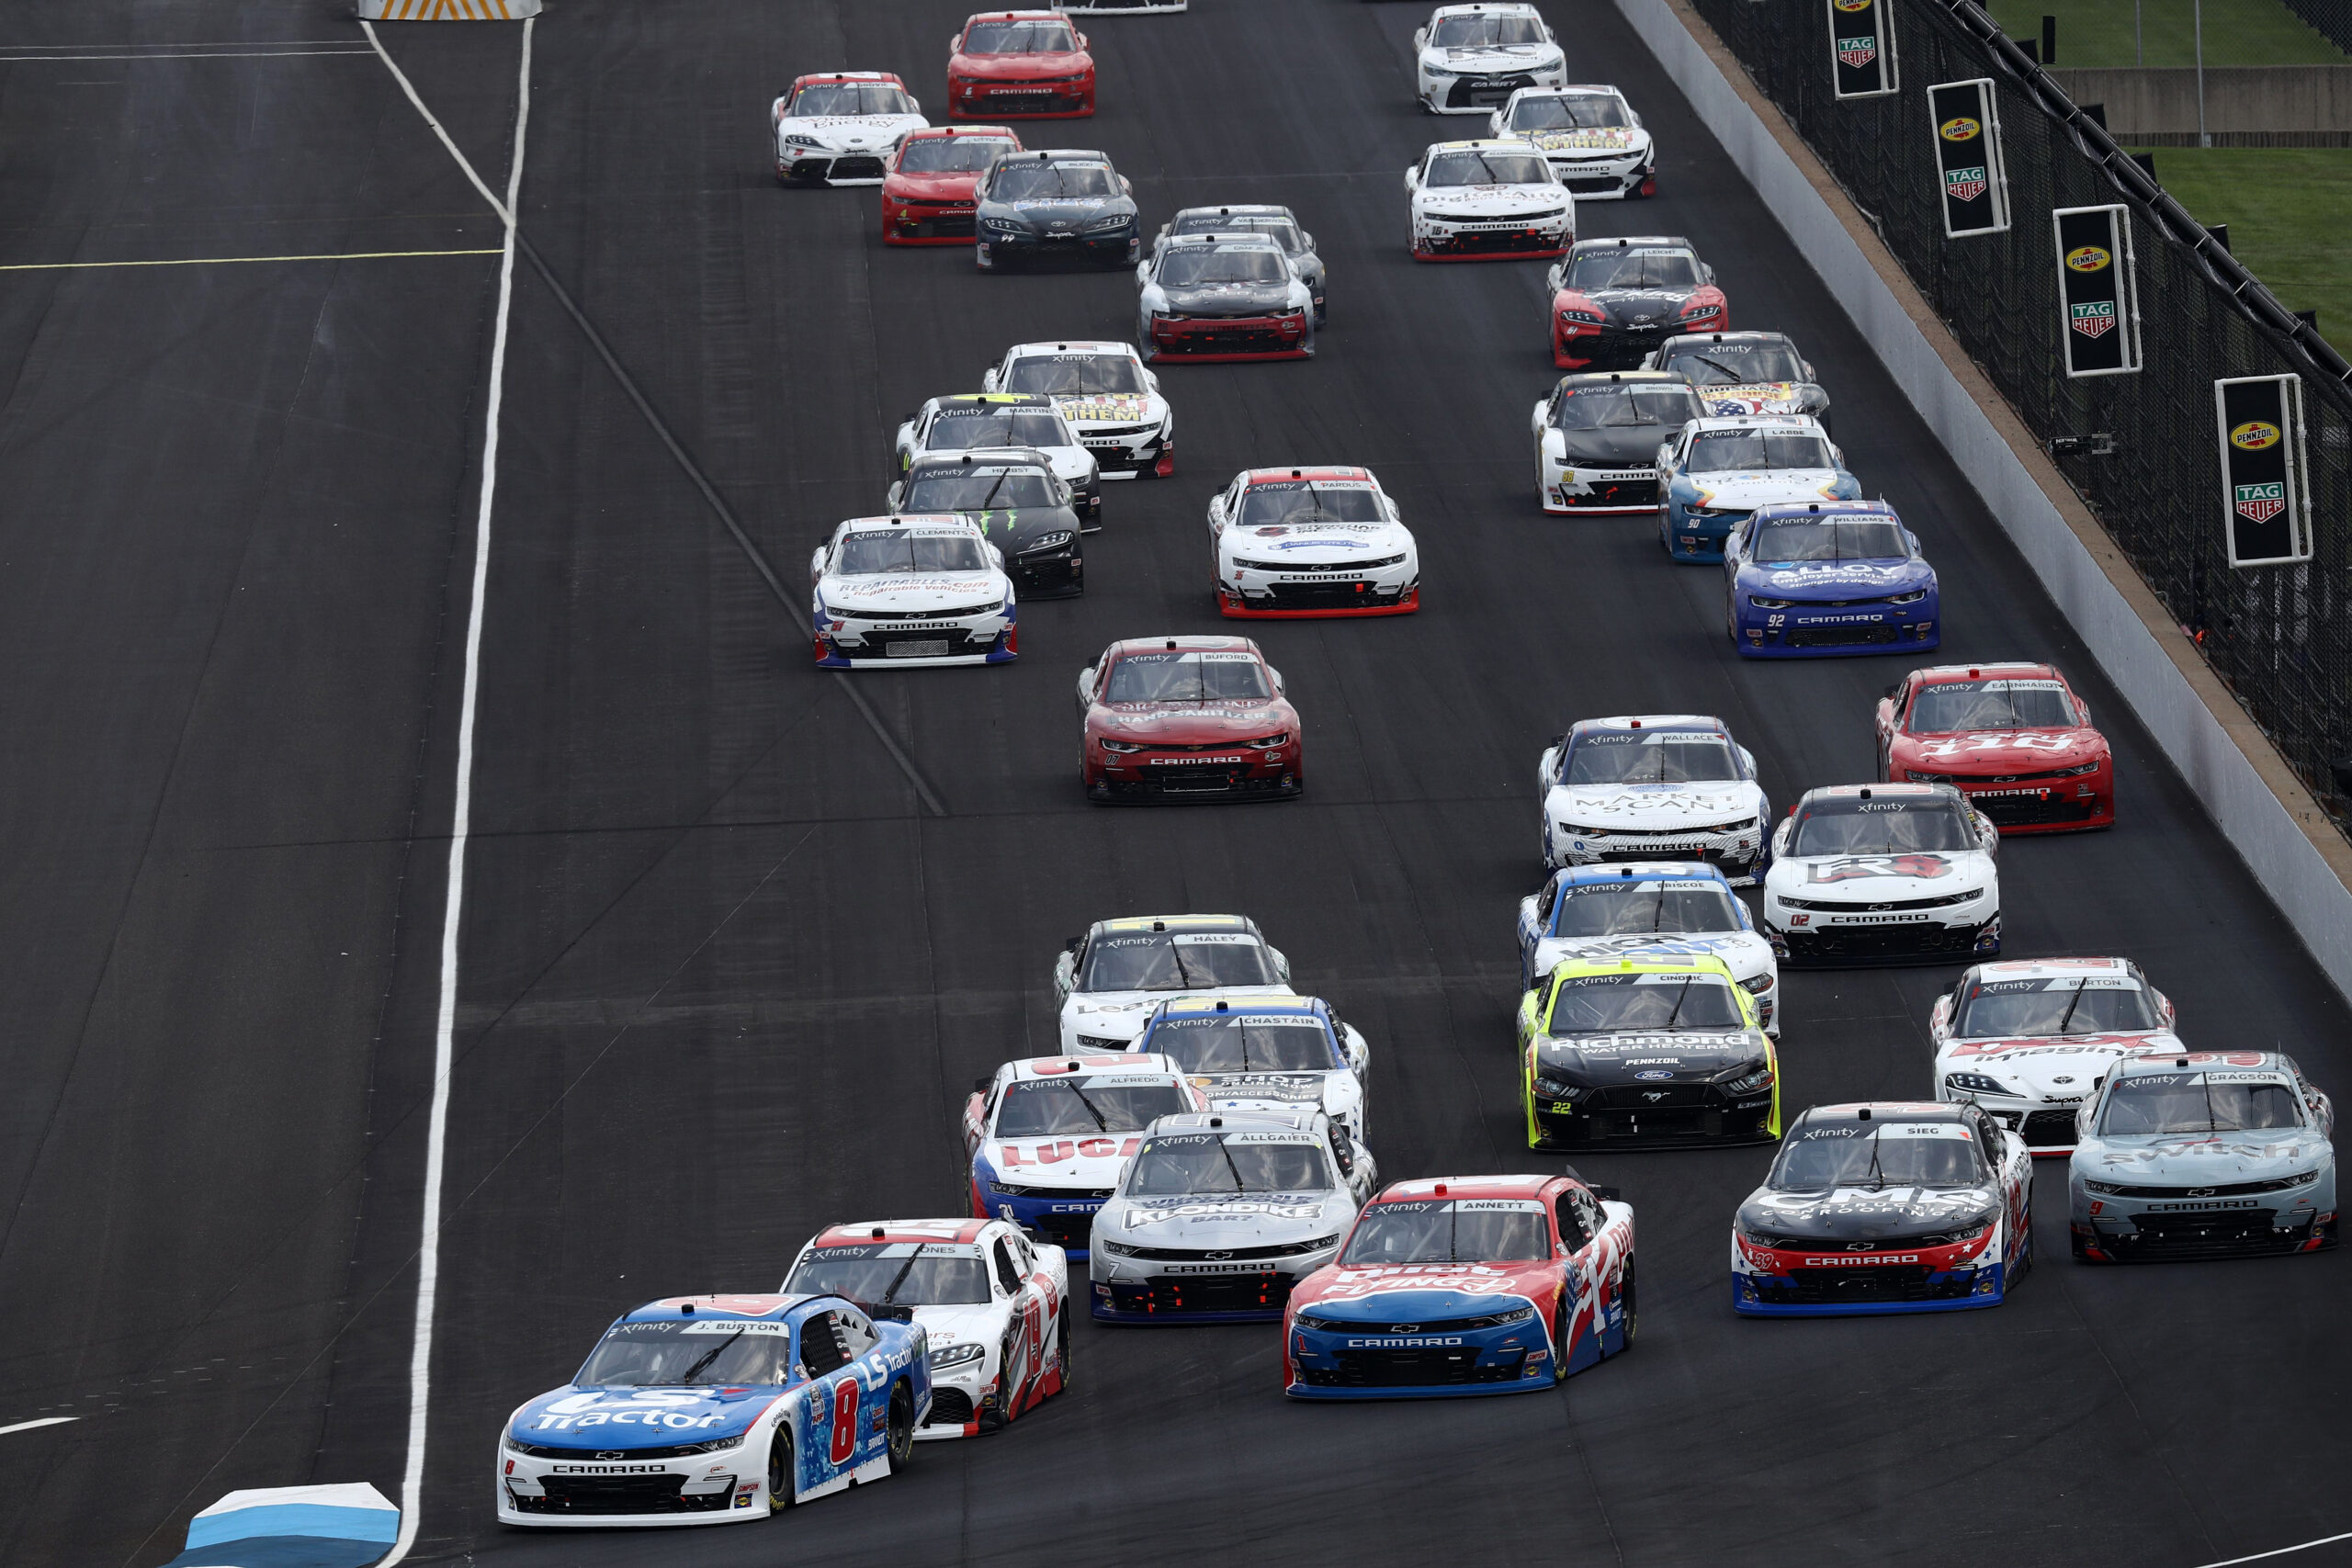 It's safe to say the XFINITY Series drivers felt like they were going the wrong way around Indy! (Photo by Jamie Squire/Getty Images)